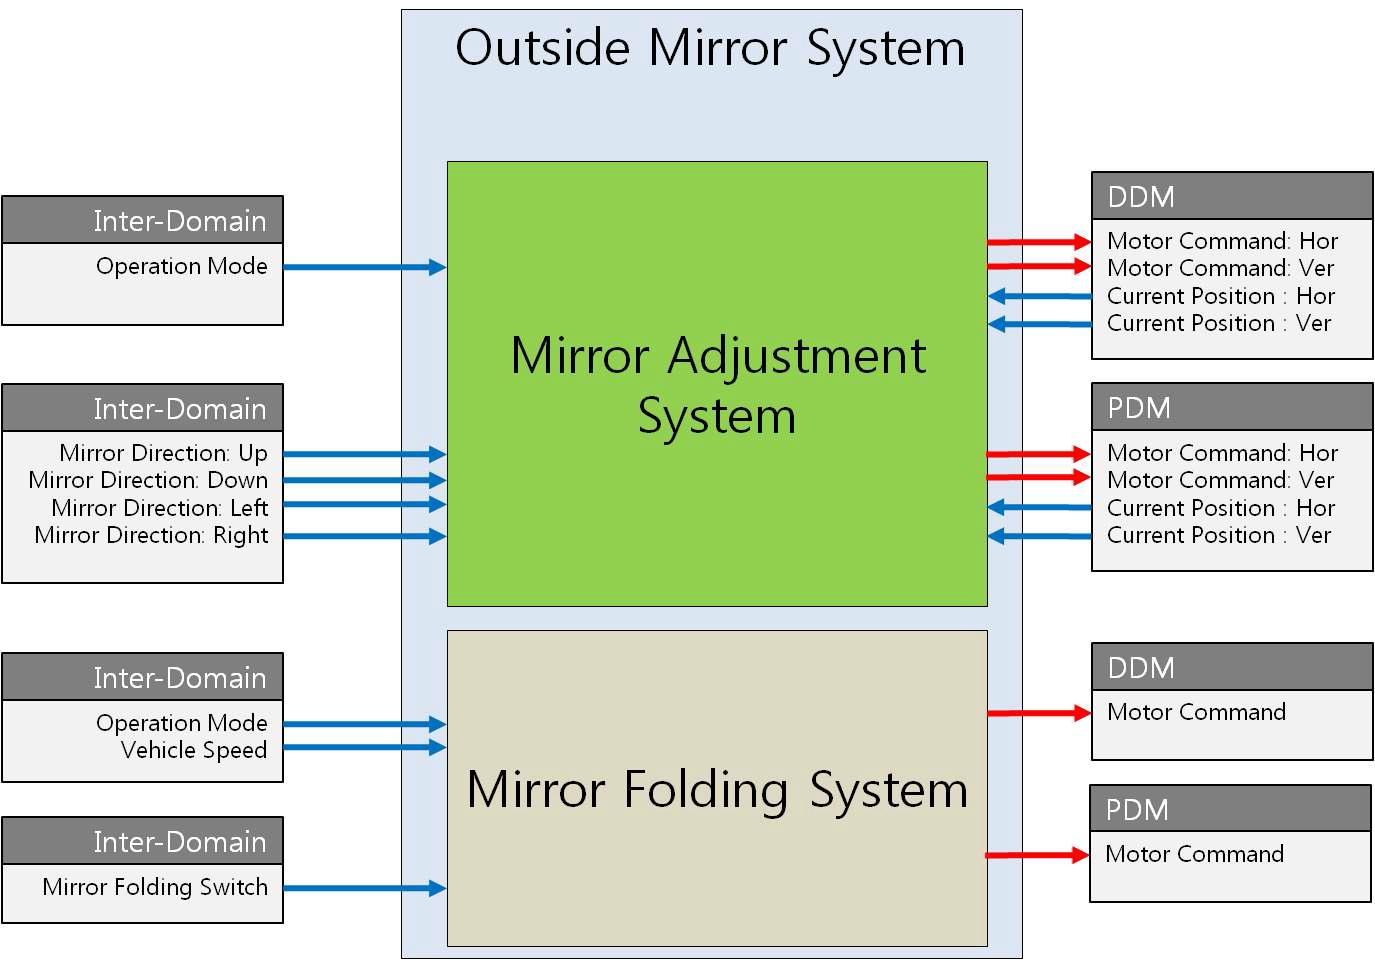 Block Diagram of Outside Mirror System